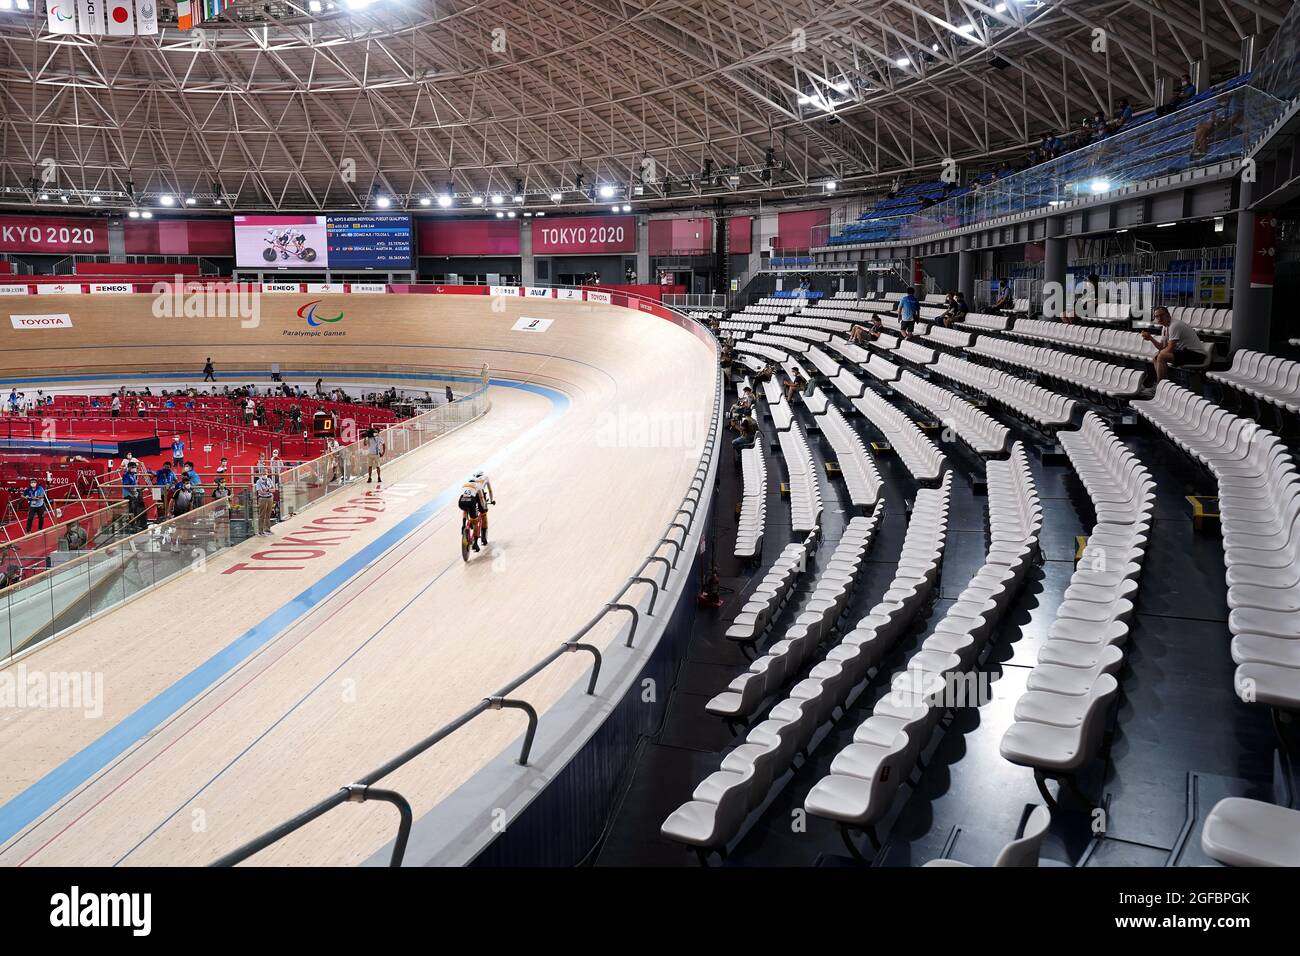 Spain’s Christian Venge Balboa and pilot Noel Martín Infante in action in the Men's Class B 4000m Individual Pursuit qualifying in front of empty stands during the Track Cycling at the Izu Velodrome on day one of the Tokyo 2020 Paralympic Games in Japan. Picture date: Wednesday August 25, 2021. Stock Photo